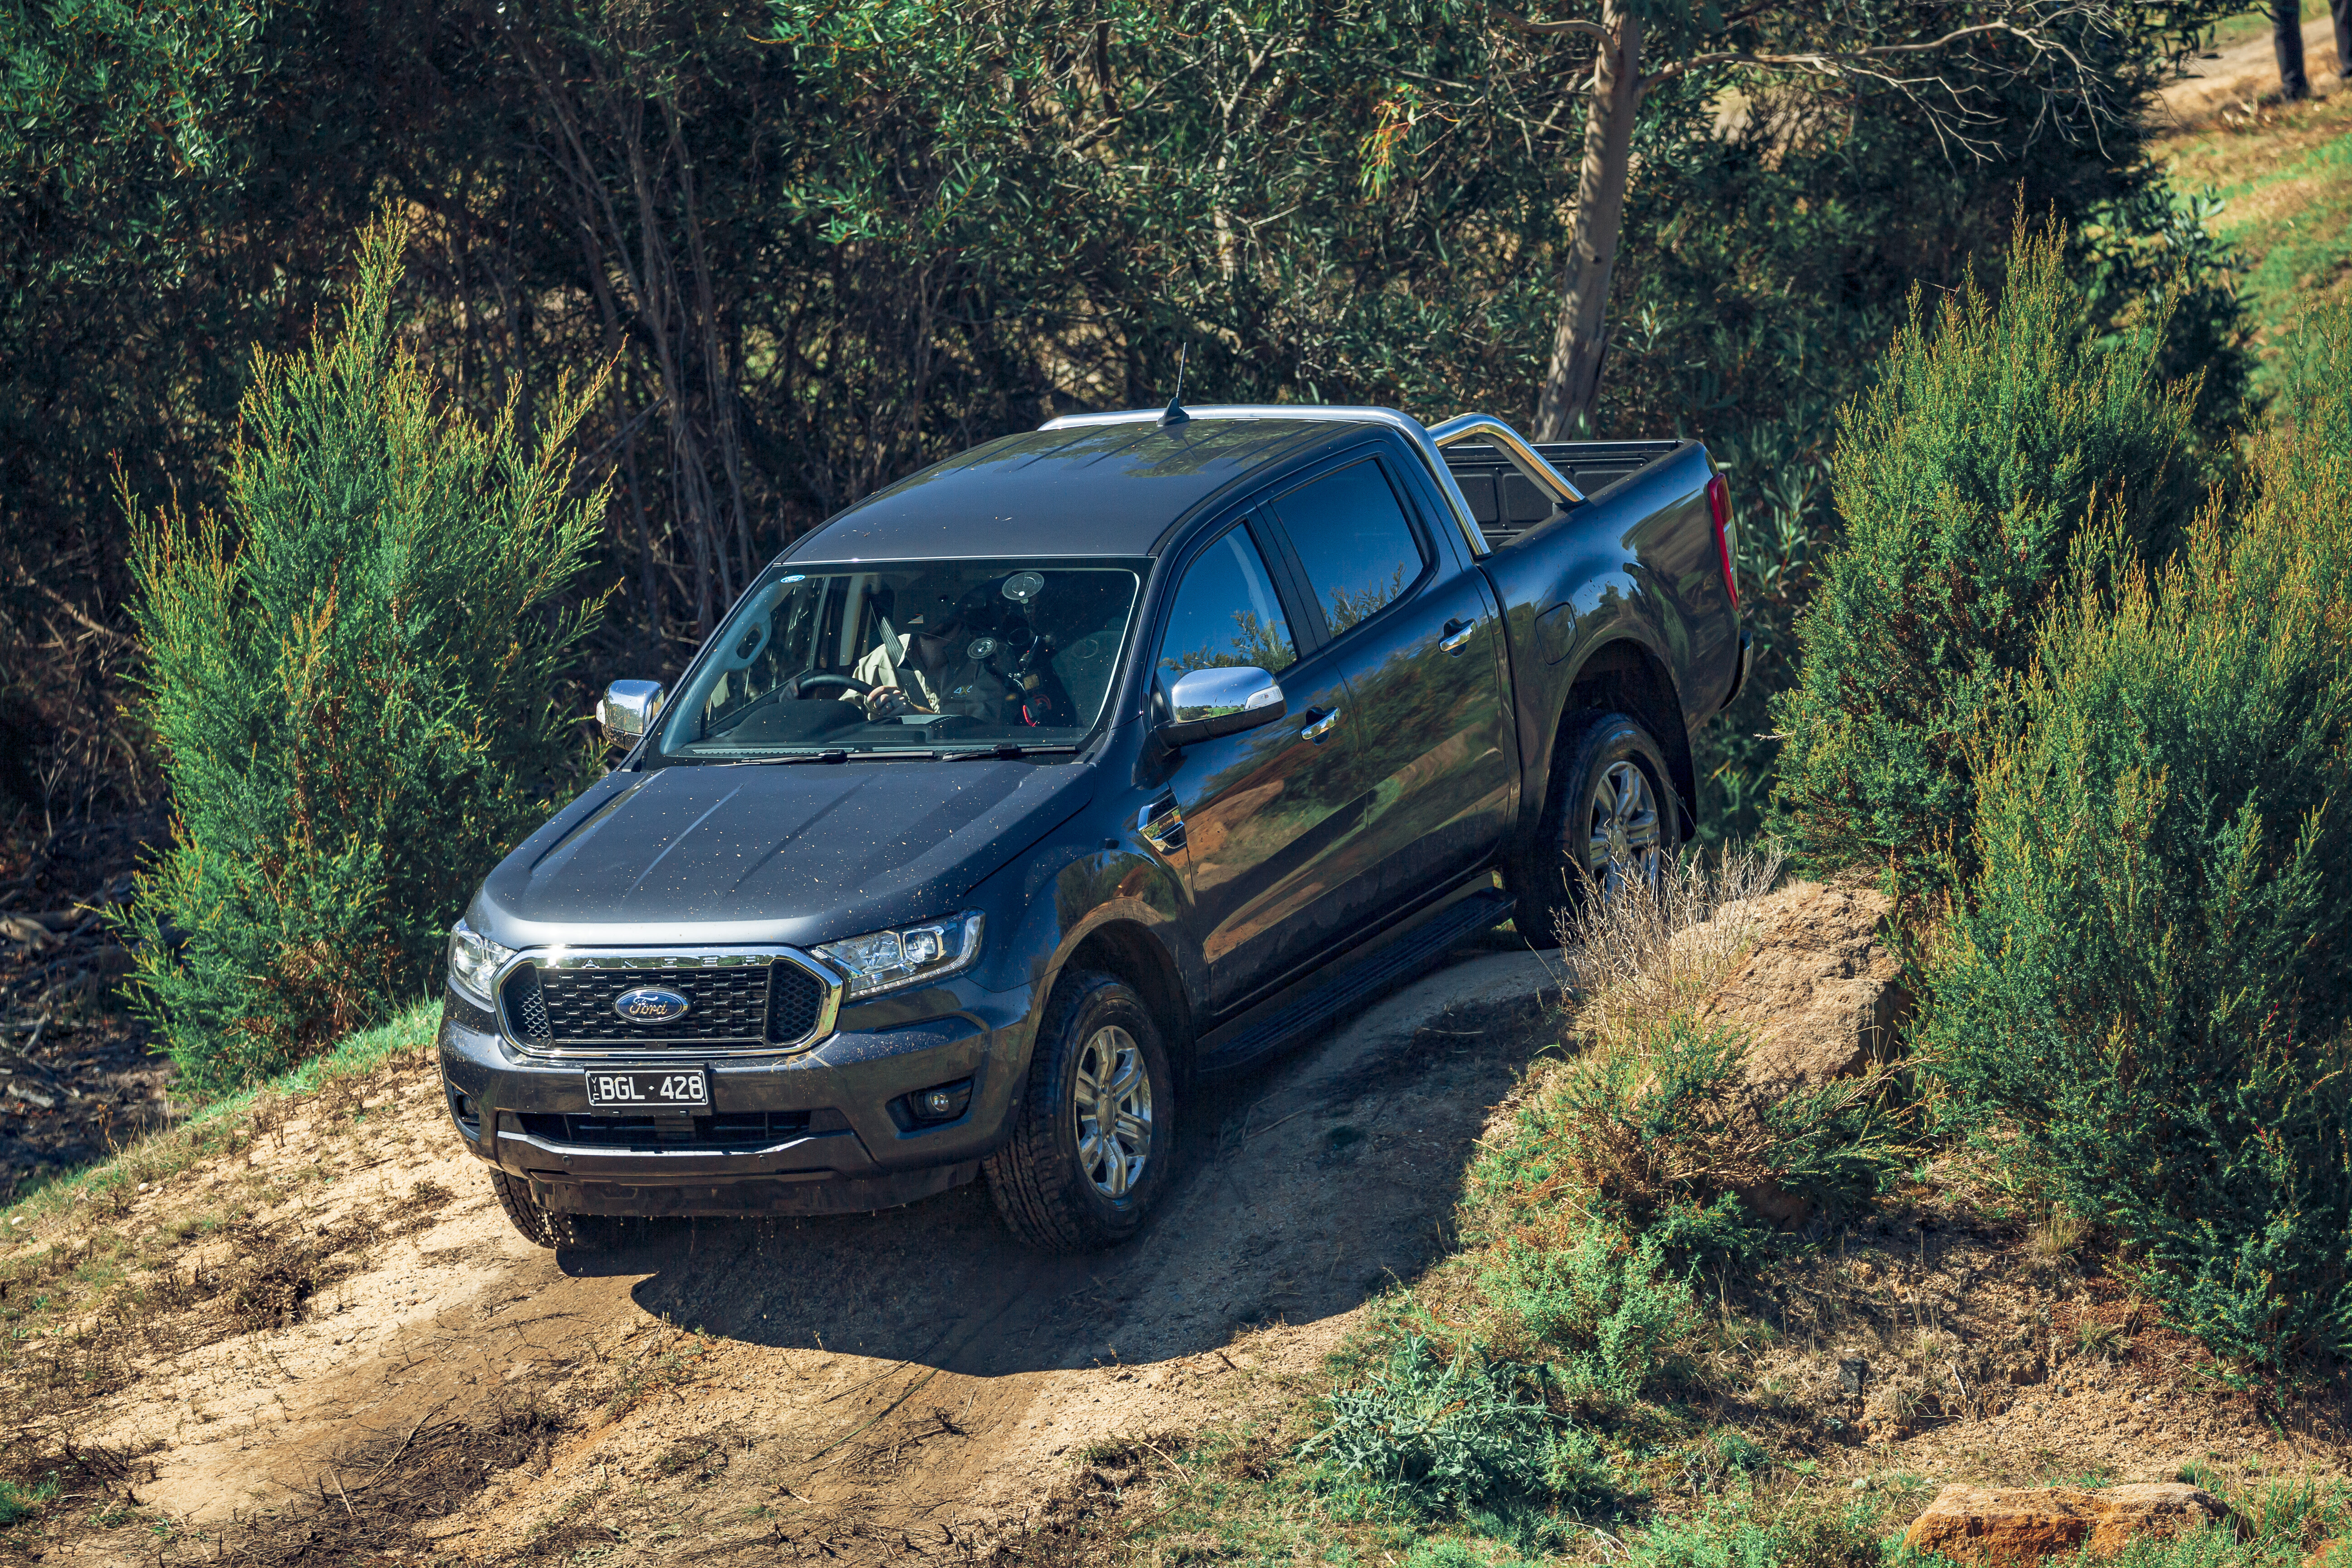 4 X 4 Australia Comparisons 2021 May 21 Ford Ranger XLT Ground Clearance